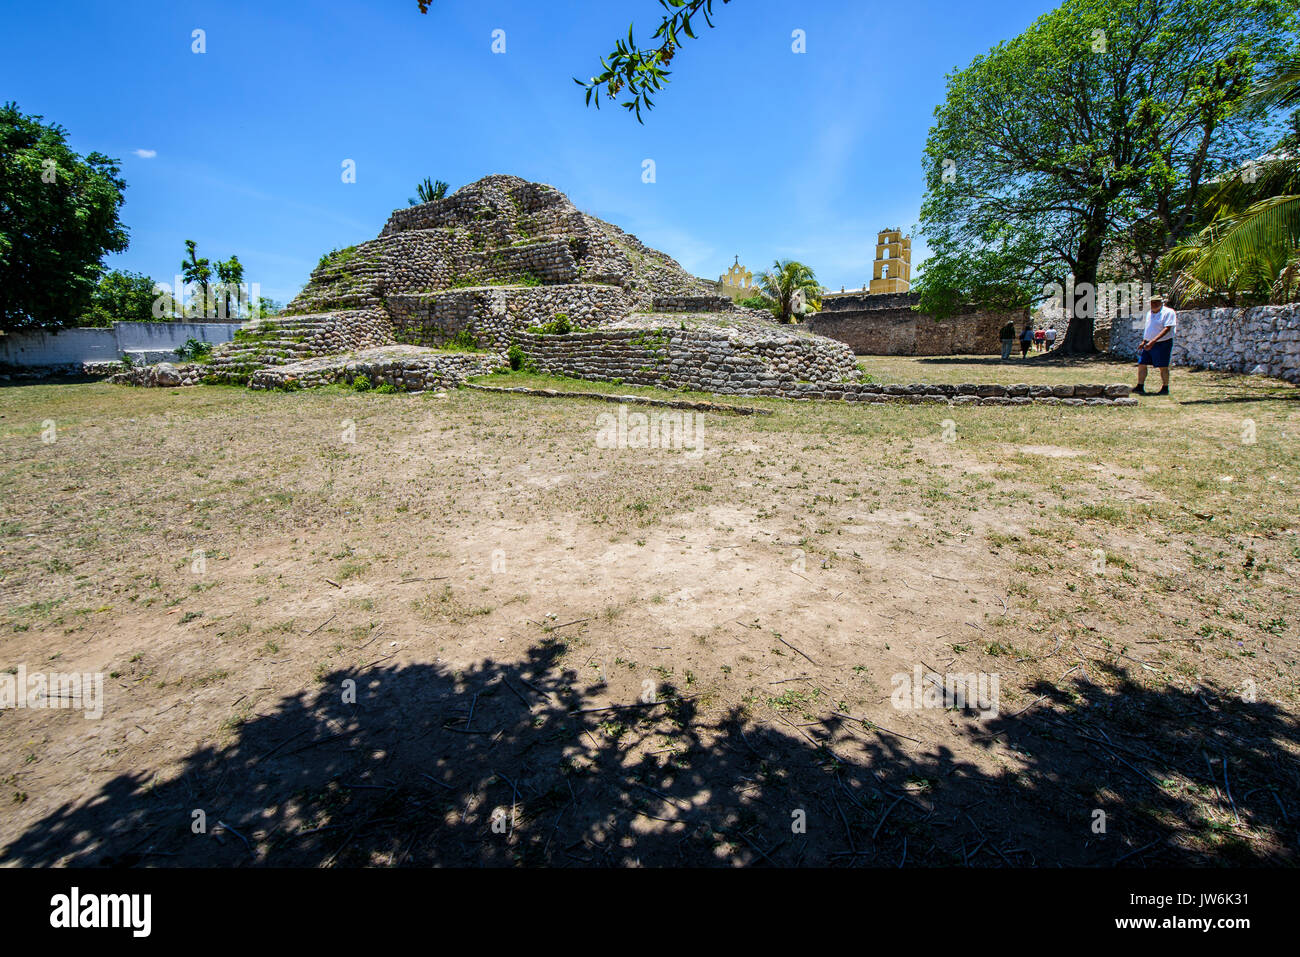 North side of the pyramid in Acanceh archeological site, Acanceh, Yucatan state, Mexico Stock Photo